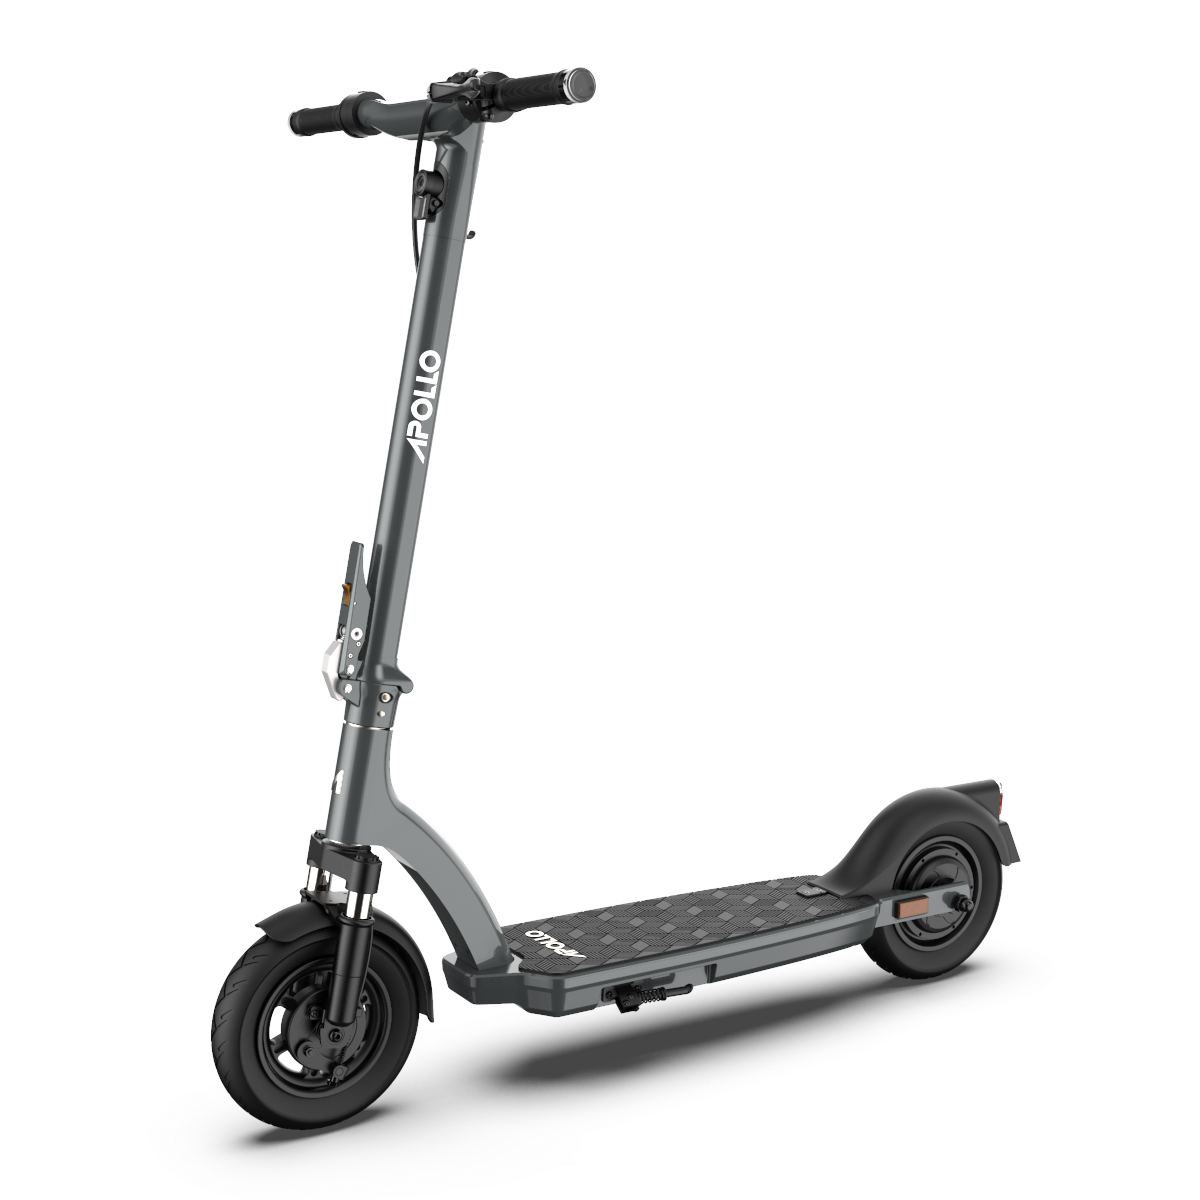 Source New type of self-propelled Go Kart roller scooter, Ezy